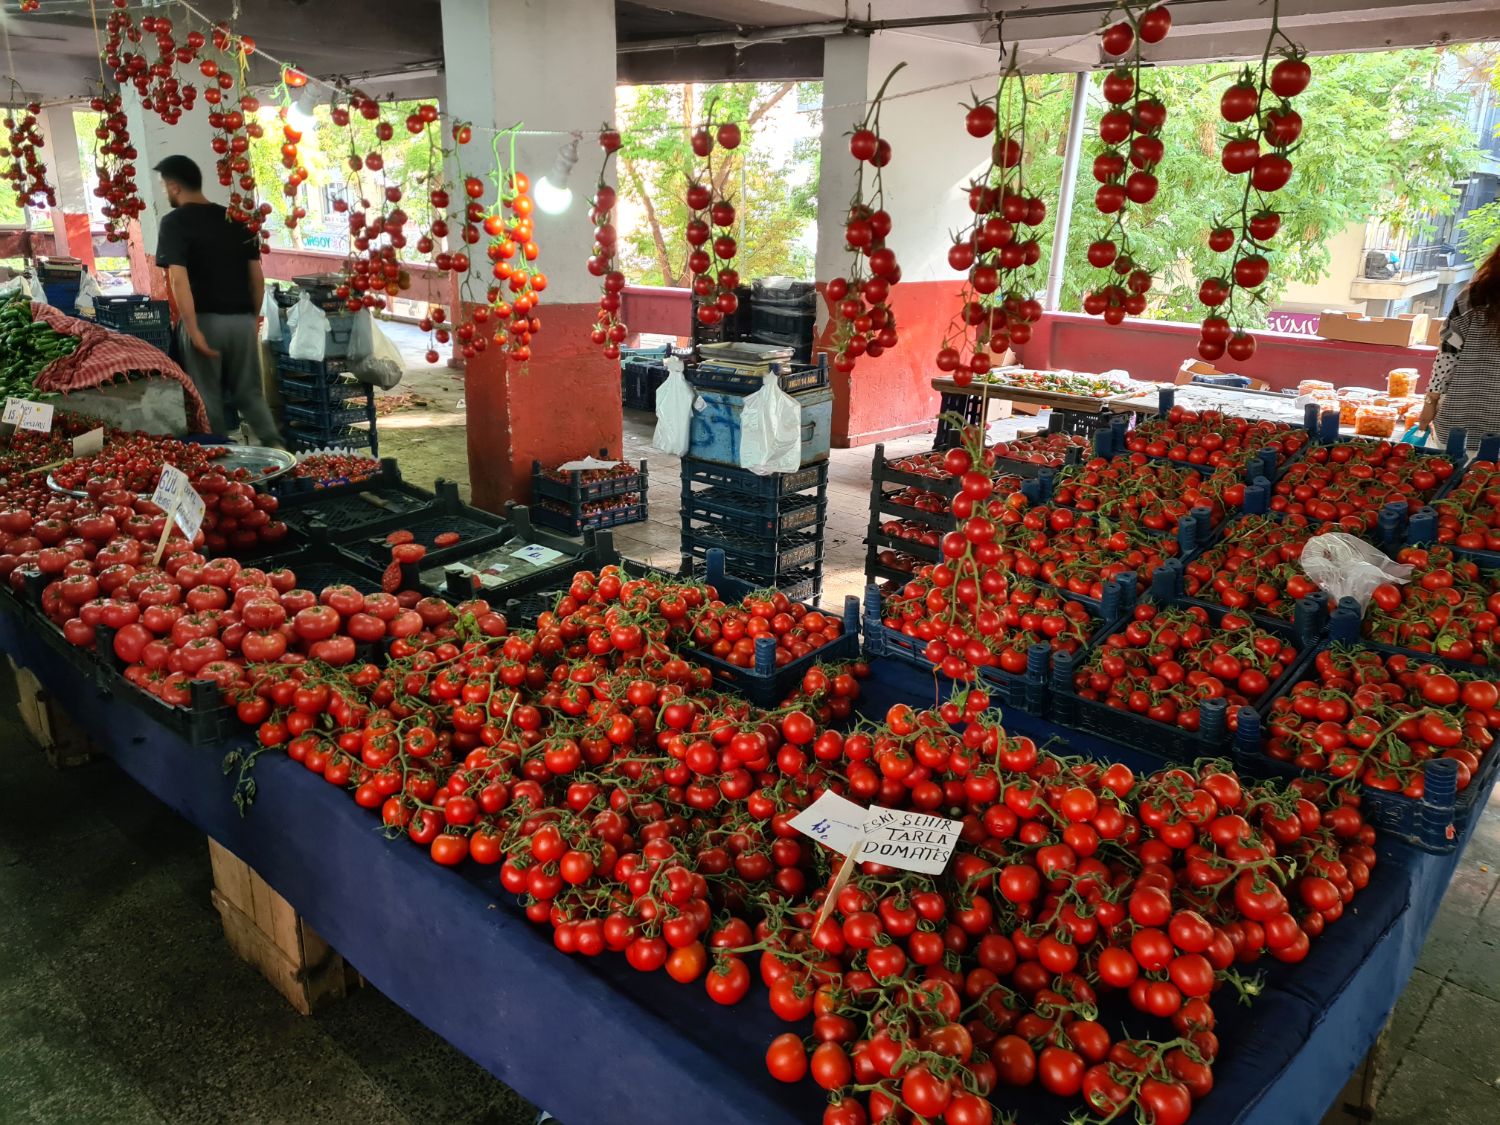 No shortage of tomatoes in this bazaar